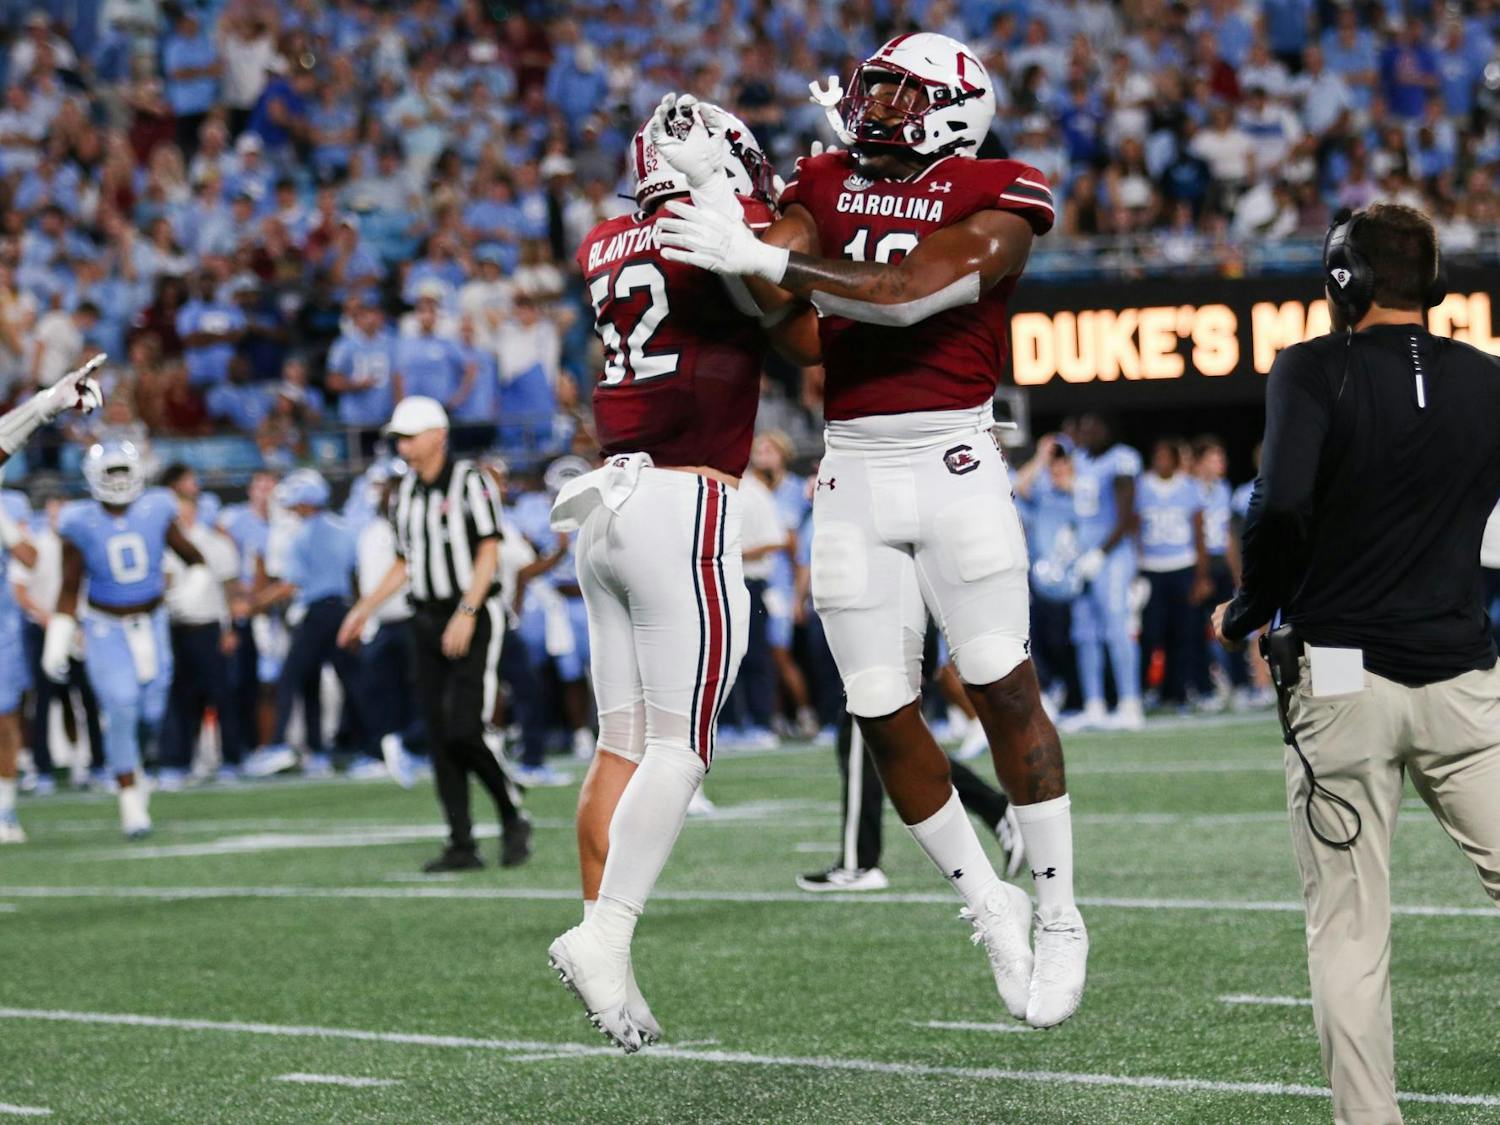 Sophomore linebacker Stone Blanton and graduate student edge Drew Tuazama celebrate after a successful defensive play. The Gamecocks fell to the Tar Heels 31-17 on Sept. 2, 2023.